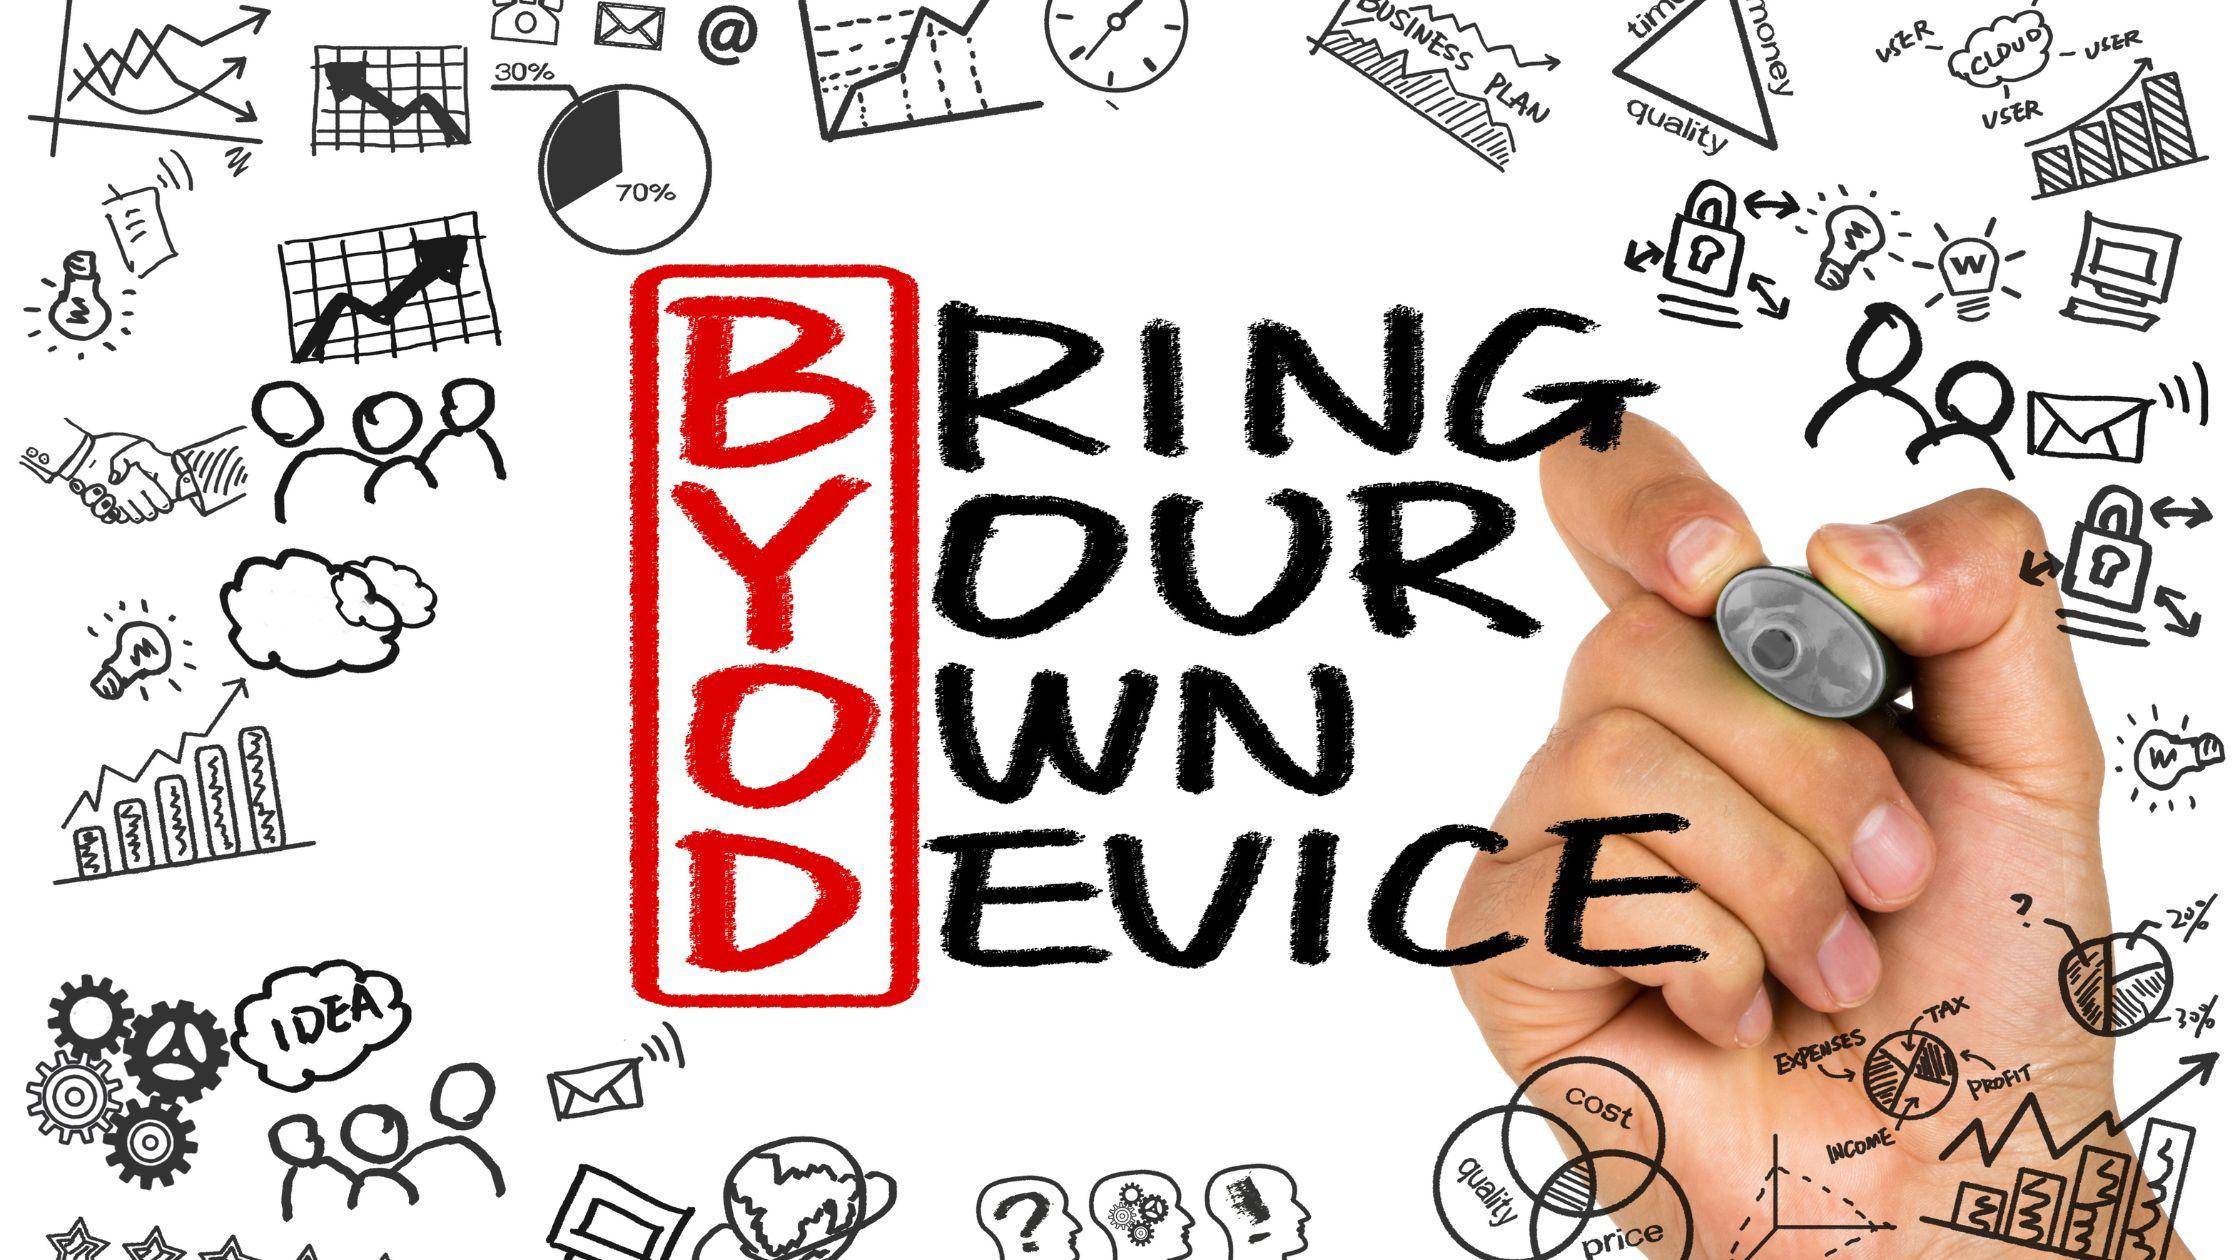 BYOD (Bring Your Own Device): Advantages and Disadvantages and Risks